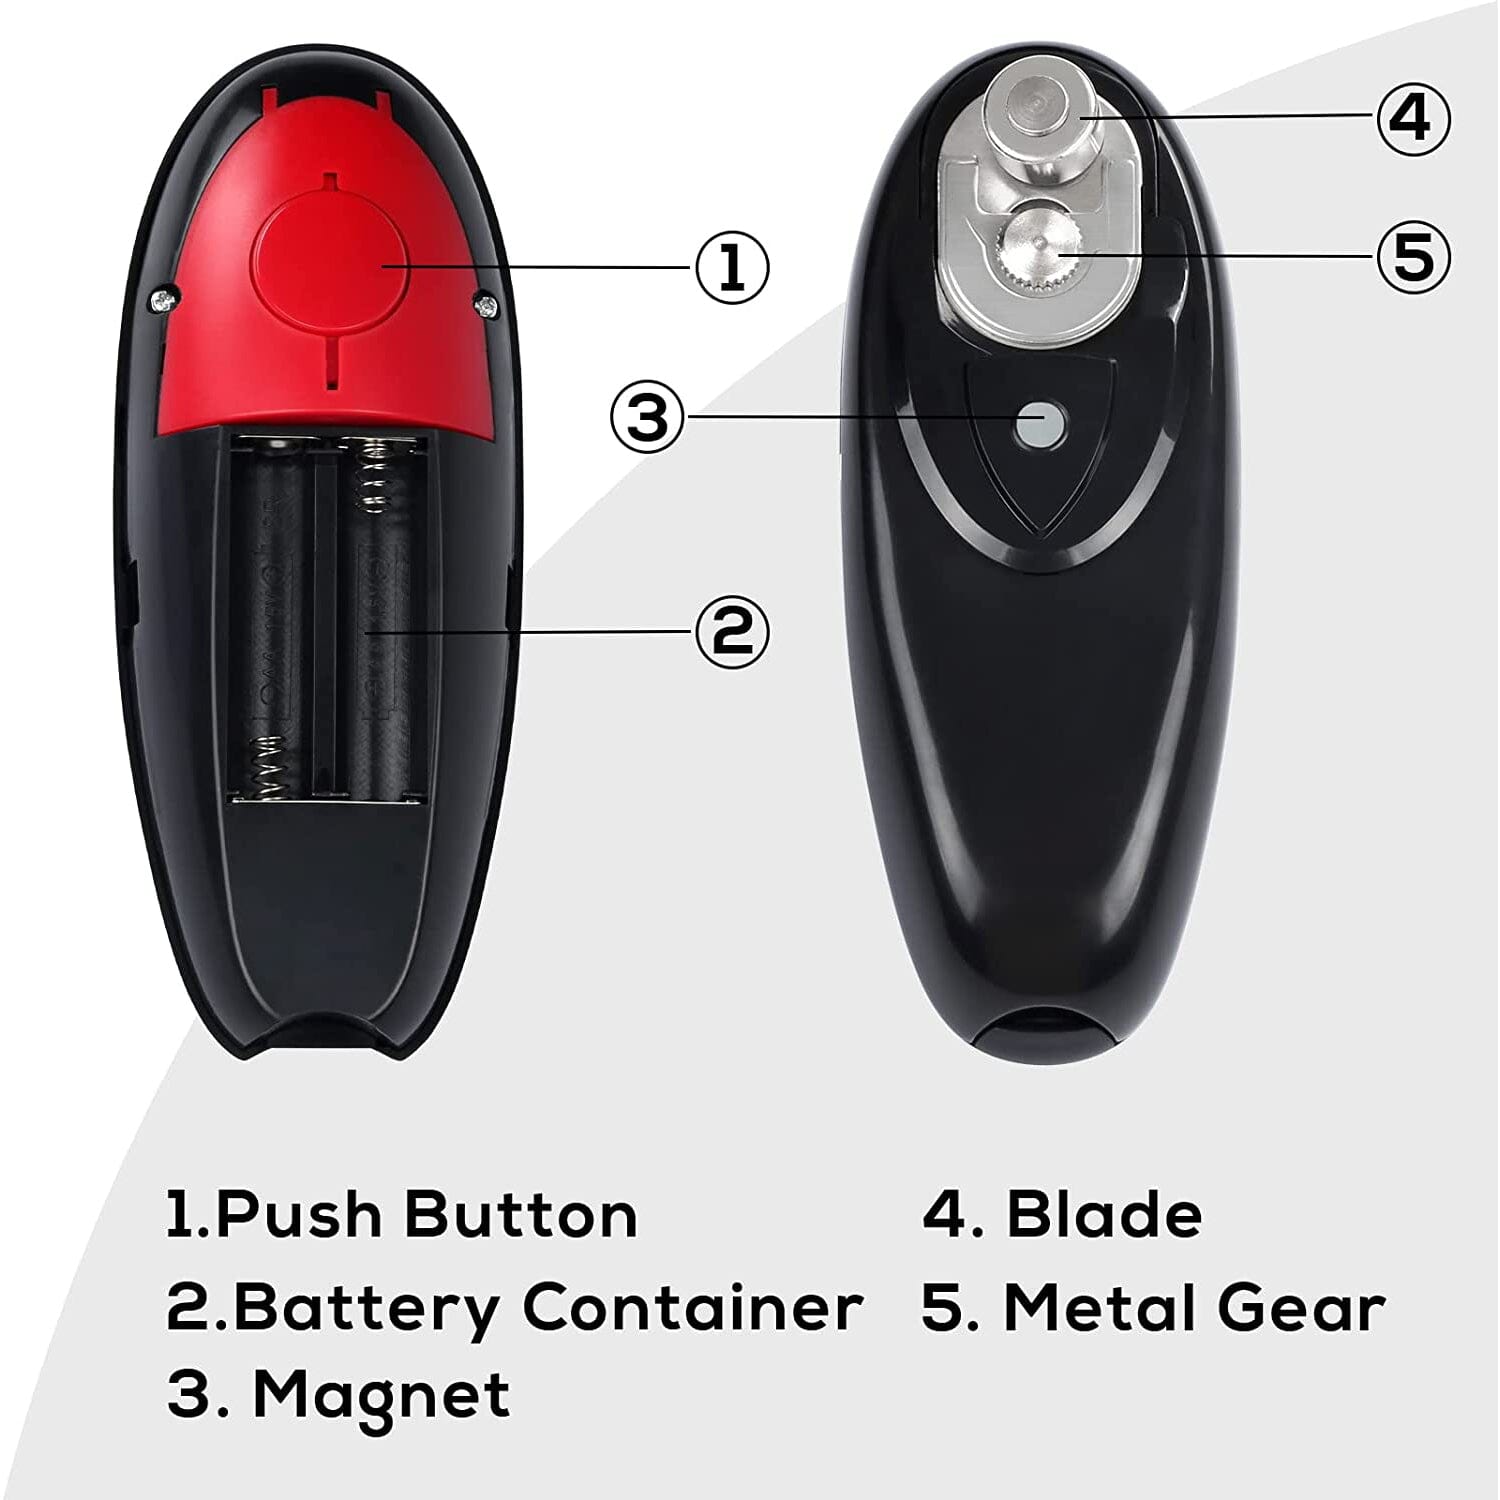 Electric Can Opener with One-Touch on & Off